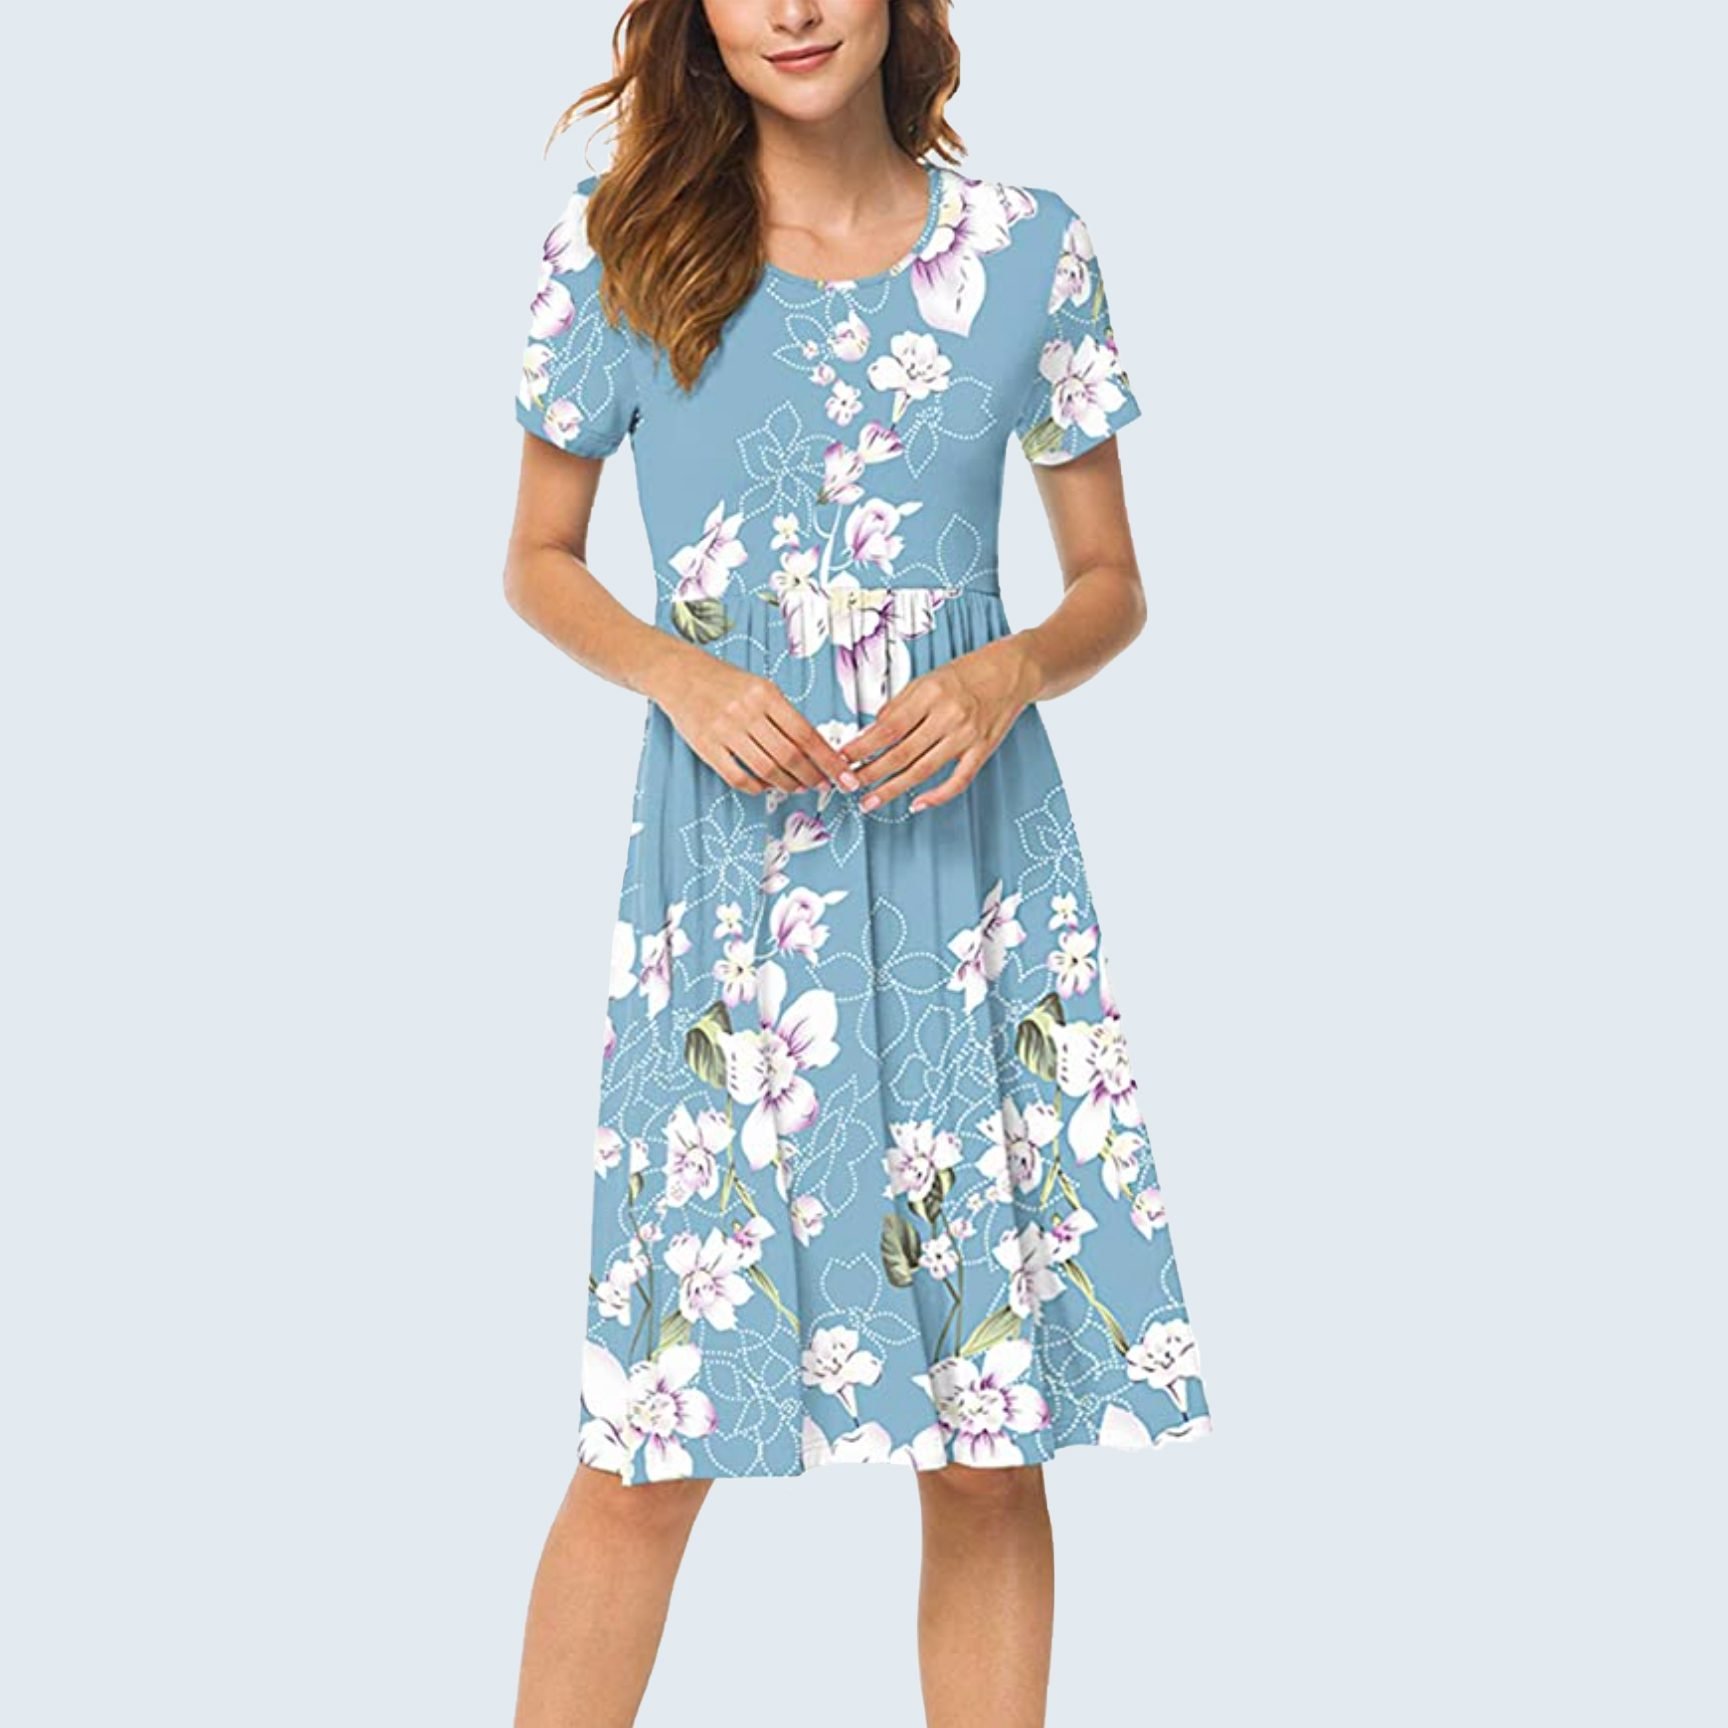 The Best Dresses on Amazon for Returning to Work | Reader's Digest